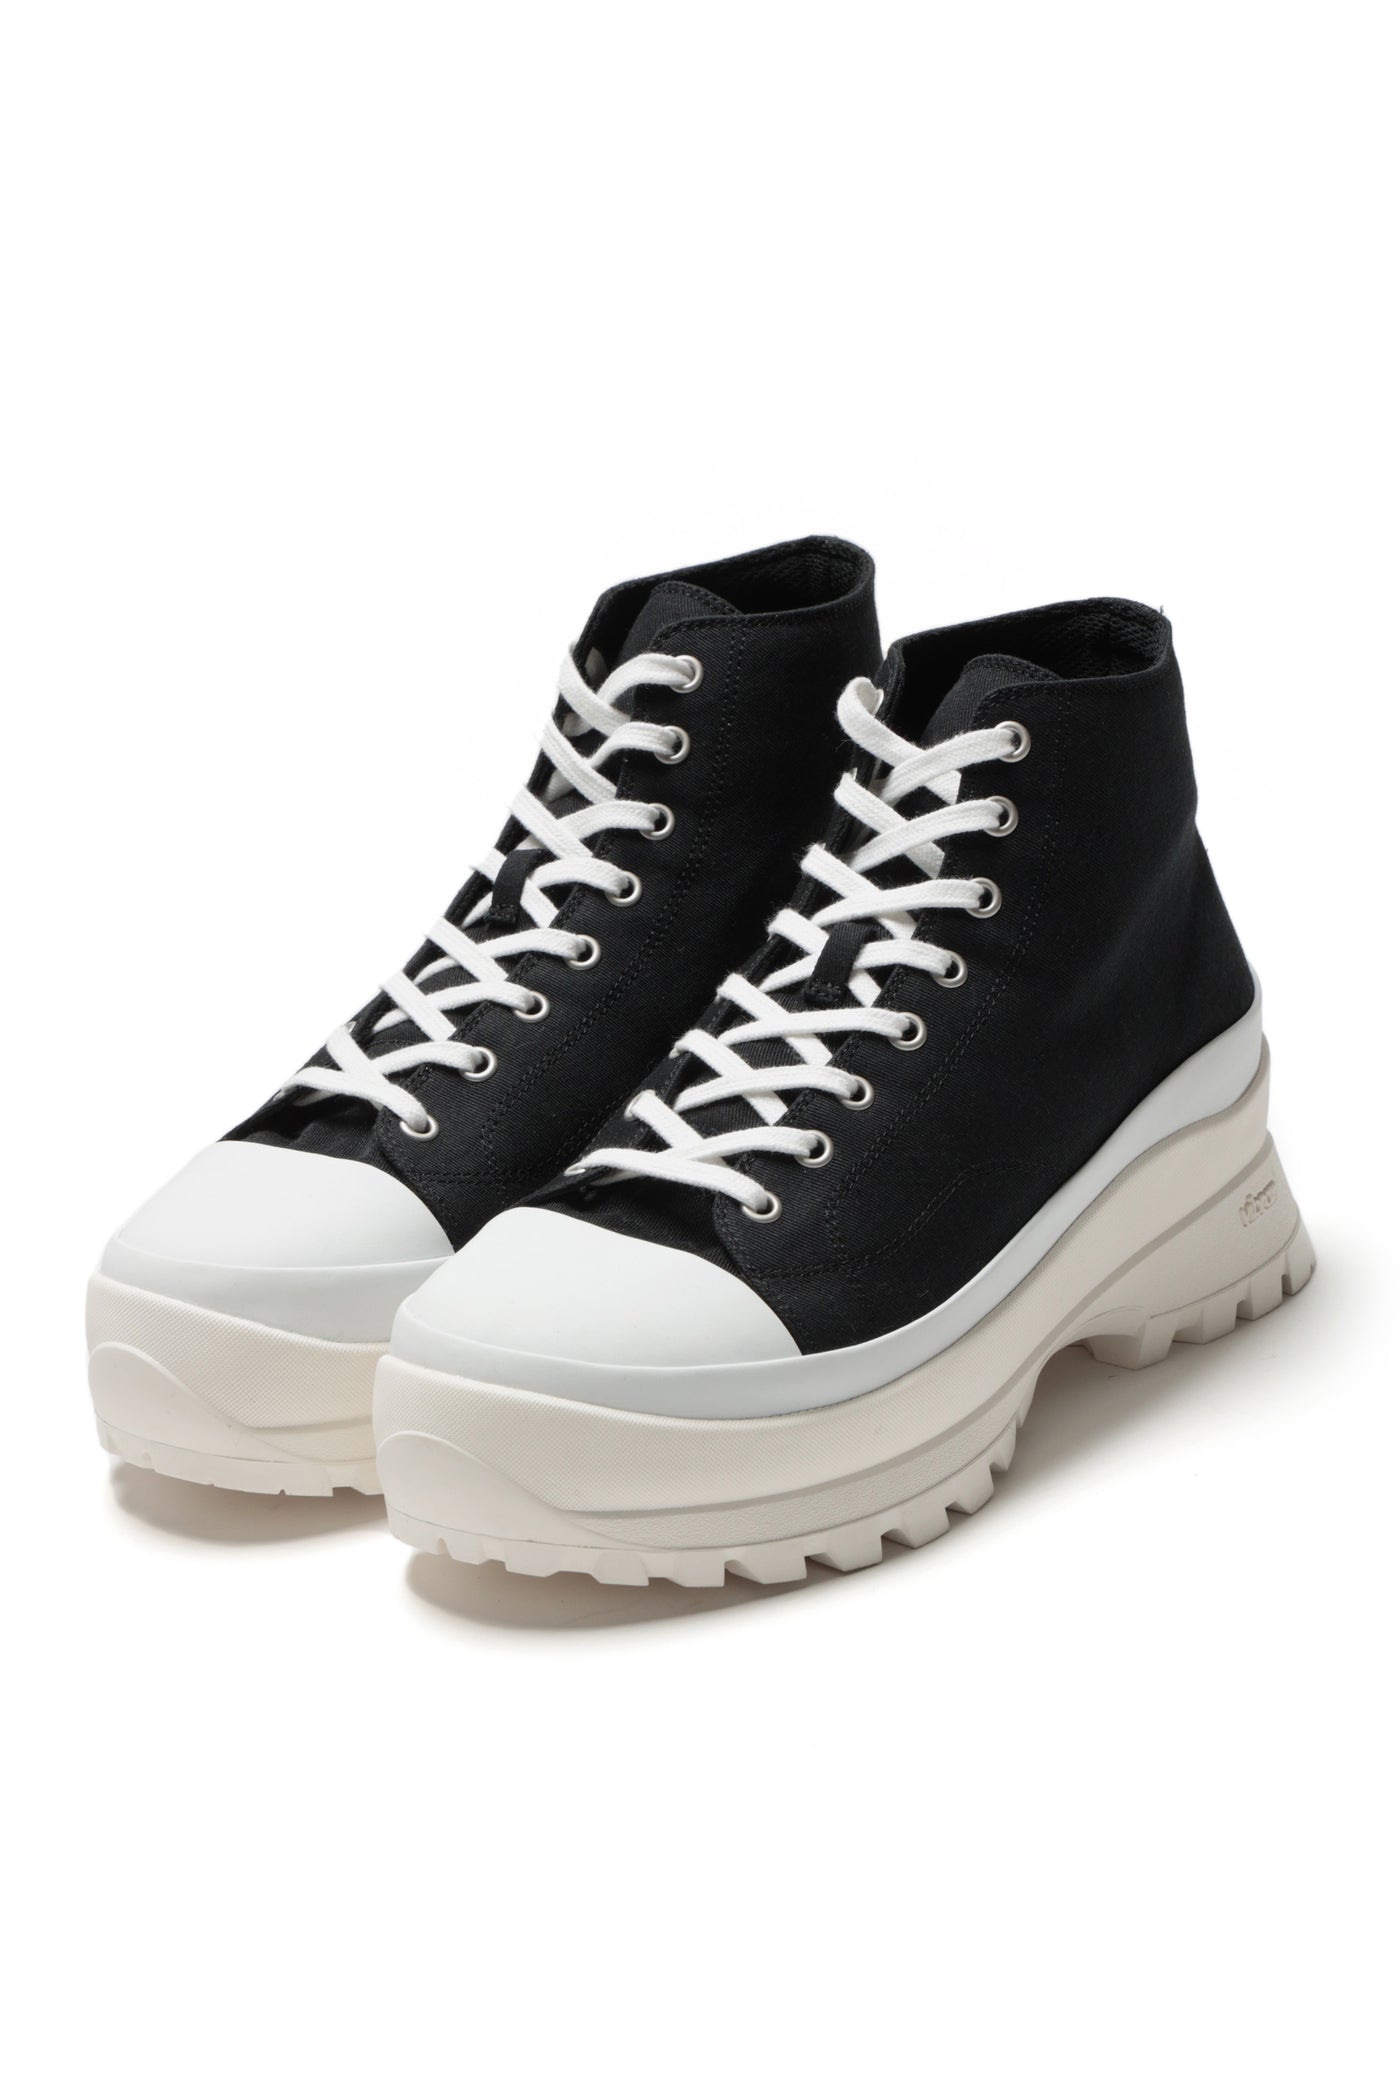 AA32-093 Cotton twill high-cut sneakers